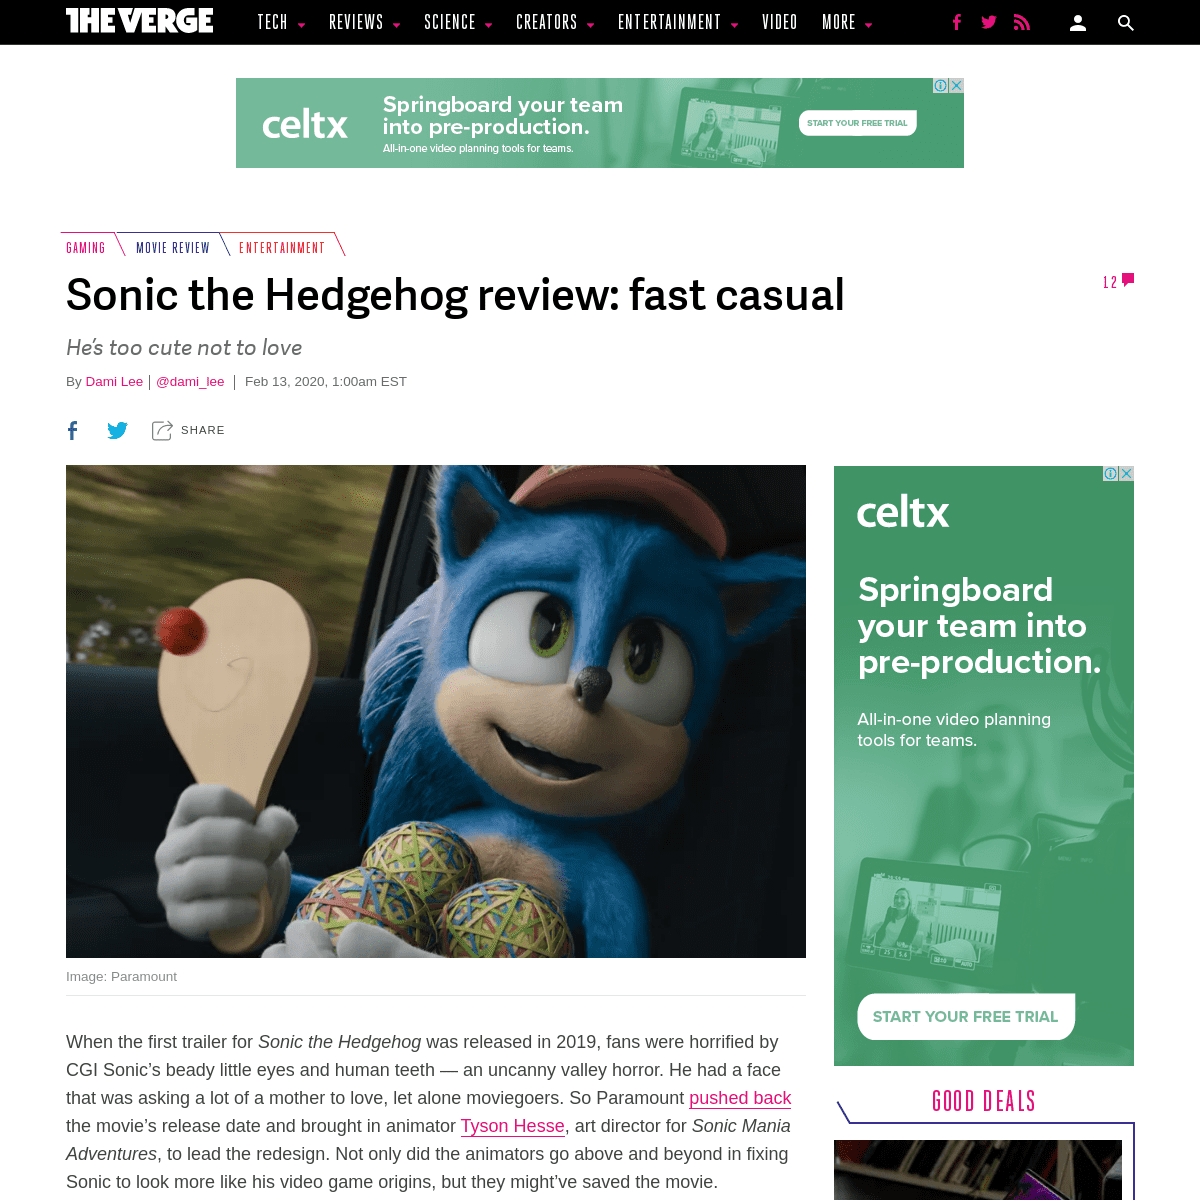 A complete backup of www.theverge.com/2020/2/13/21133092/sonic-the-hedgehog-movie-review-paramount